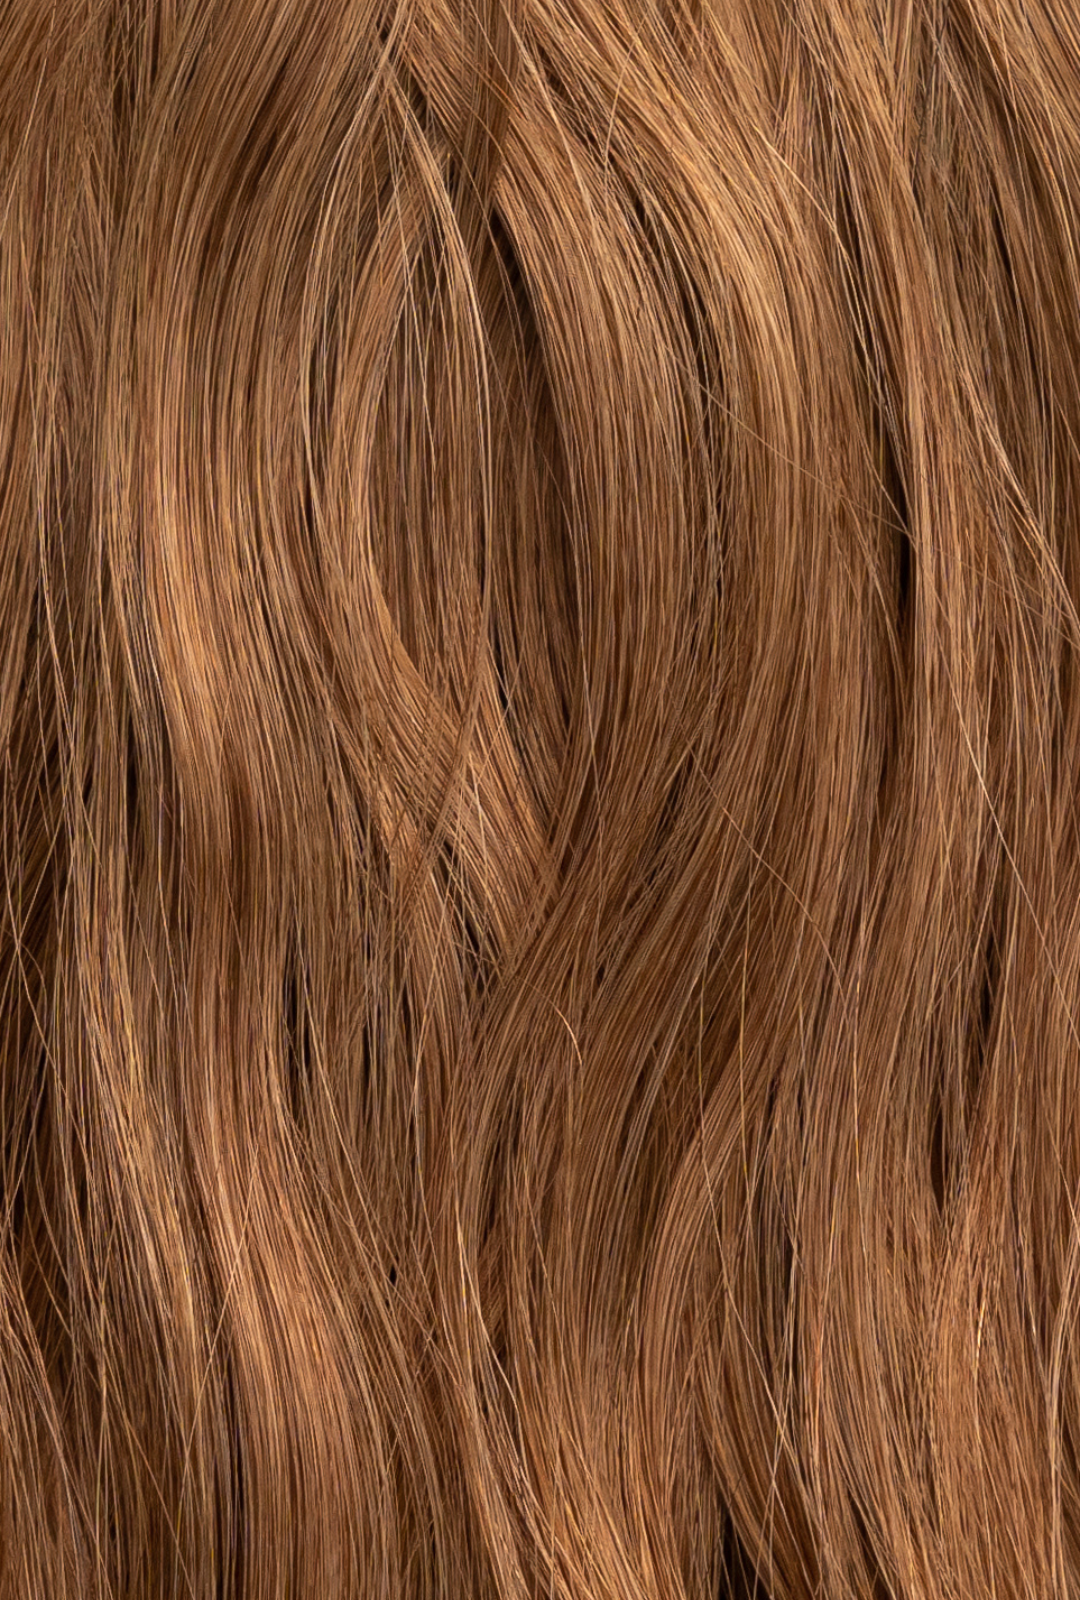 Waved by Laced Hair Machine Sewn Weft Extensions #33 (Copper Penny)